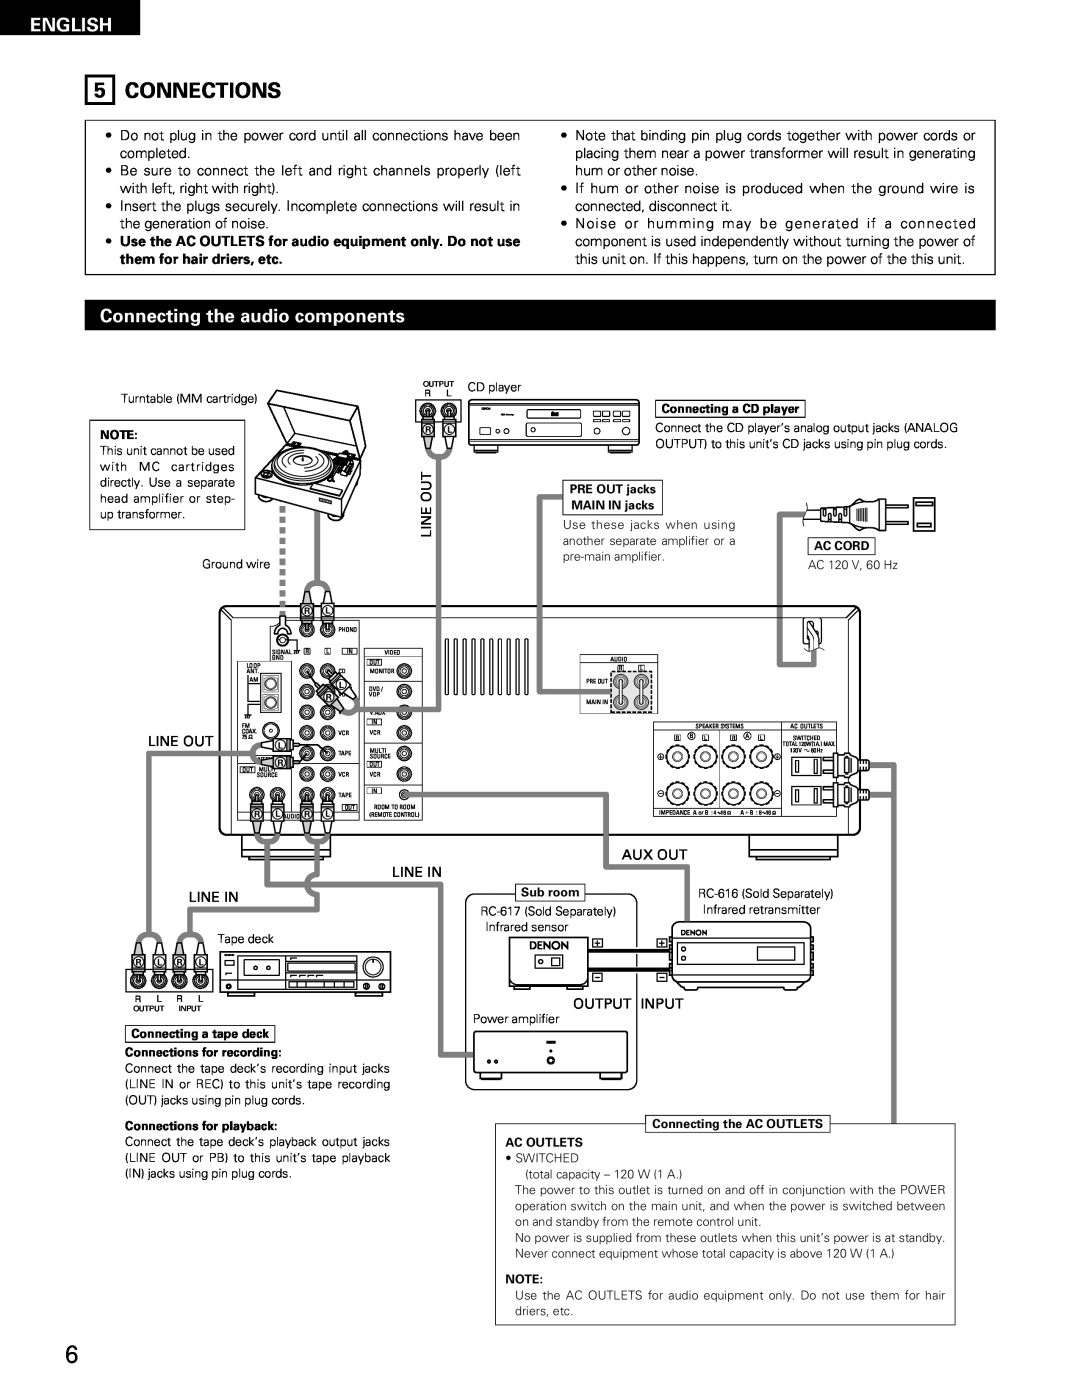 Denon DRA-685 manual Connections, Connecting the audio components, English 